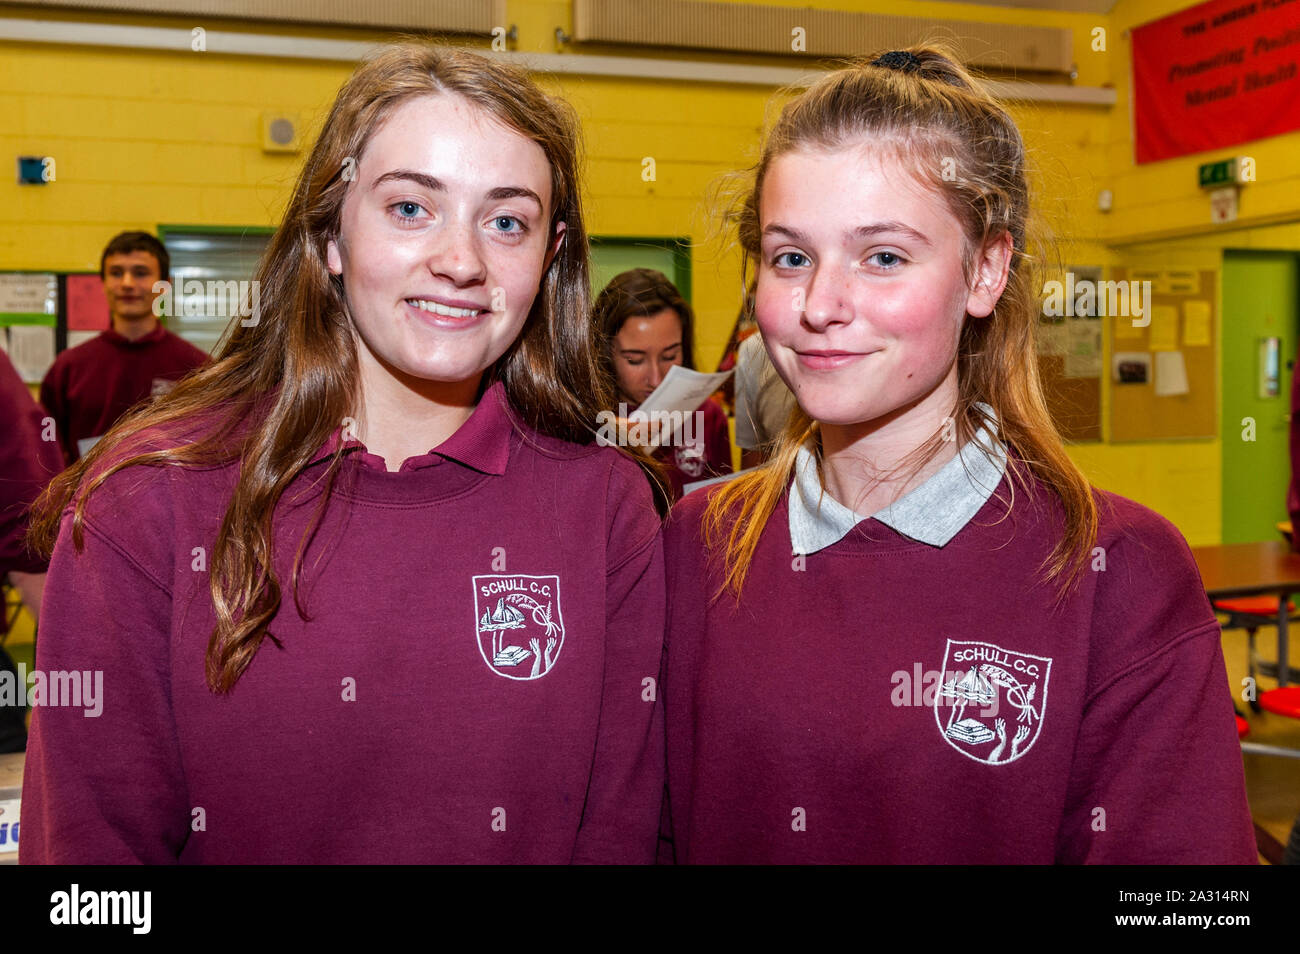 Schull, West Cork, Ireland. 4th Oct, 2019. Over 64,000 students around Ireland received their Junior Cert results this afternoon. In Schull Community College, West Cork, many students were beside themselves with happiness on seeing their results. Emma Roycroft, Schull and Amy O'Driscoll from Goleen were pleased with theur results. Credit: Andy Gibson/Alamy Live News. Stock Photo